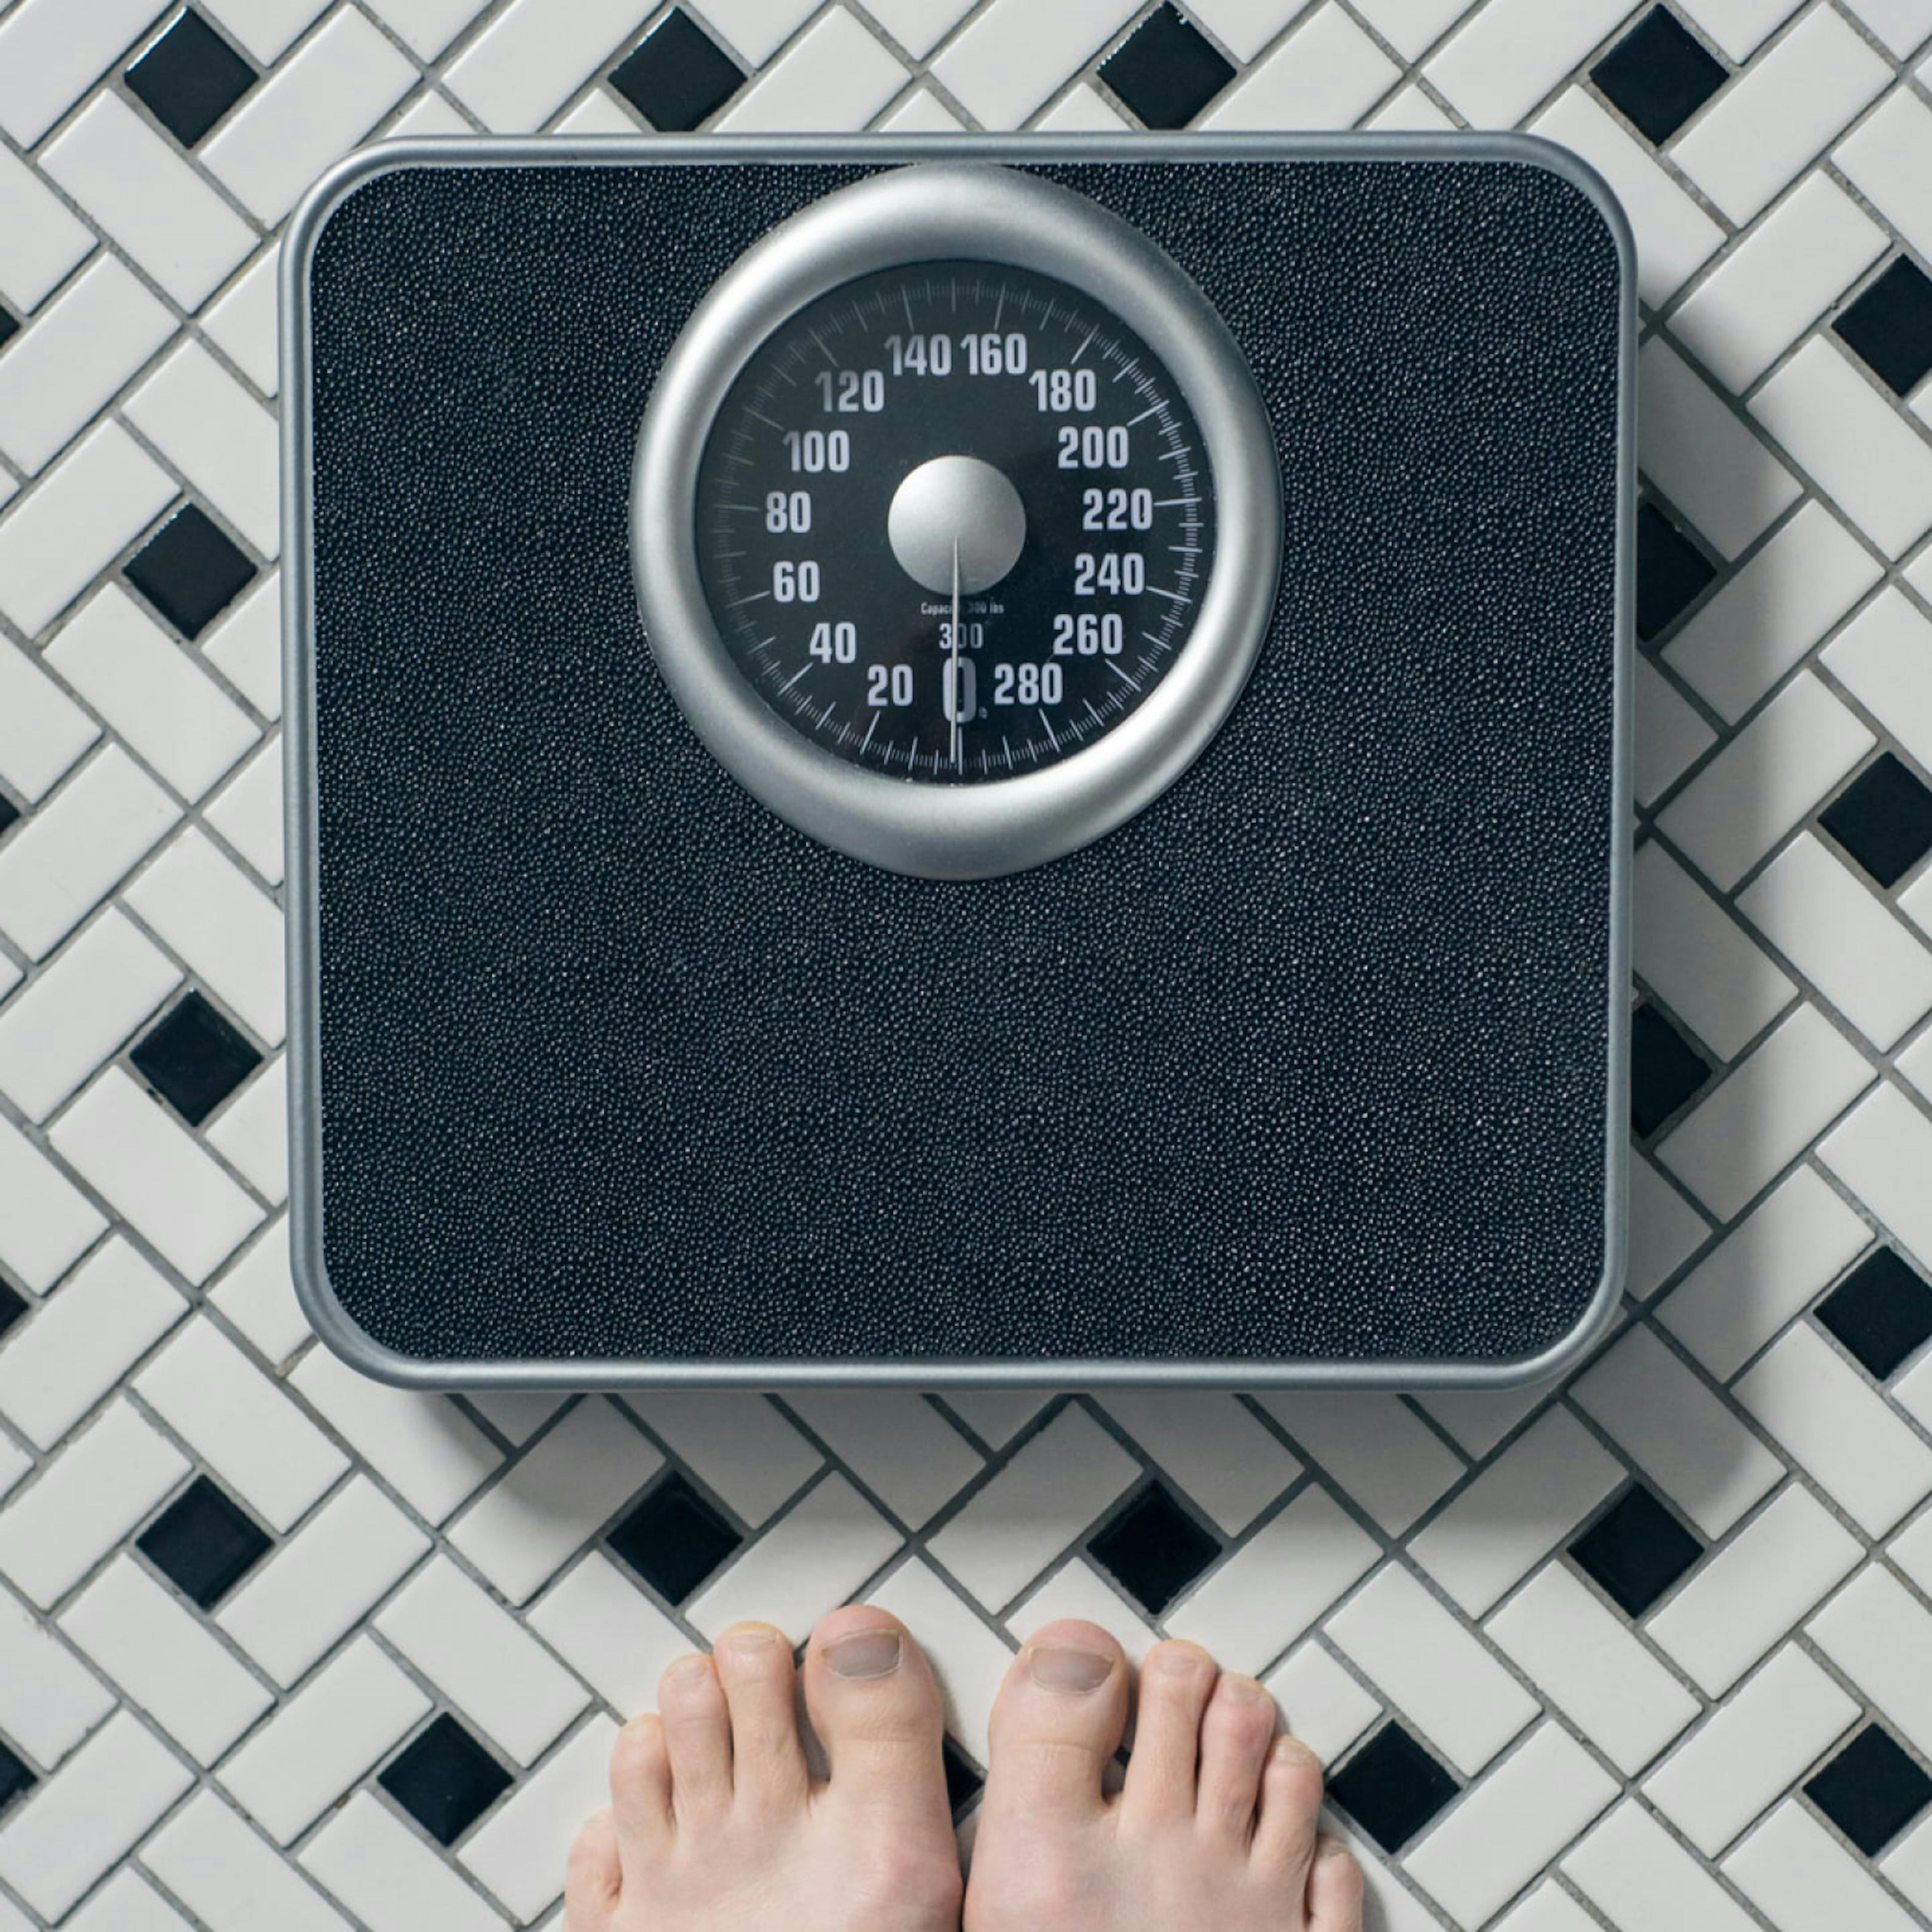 My COVID Weight Loss Isn’t a Good Thing